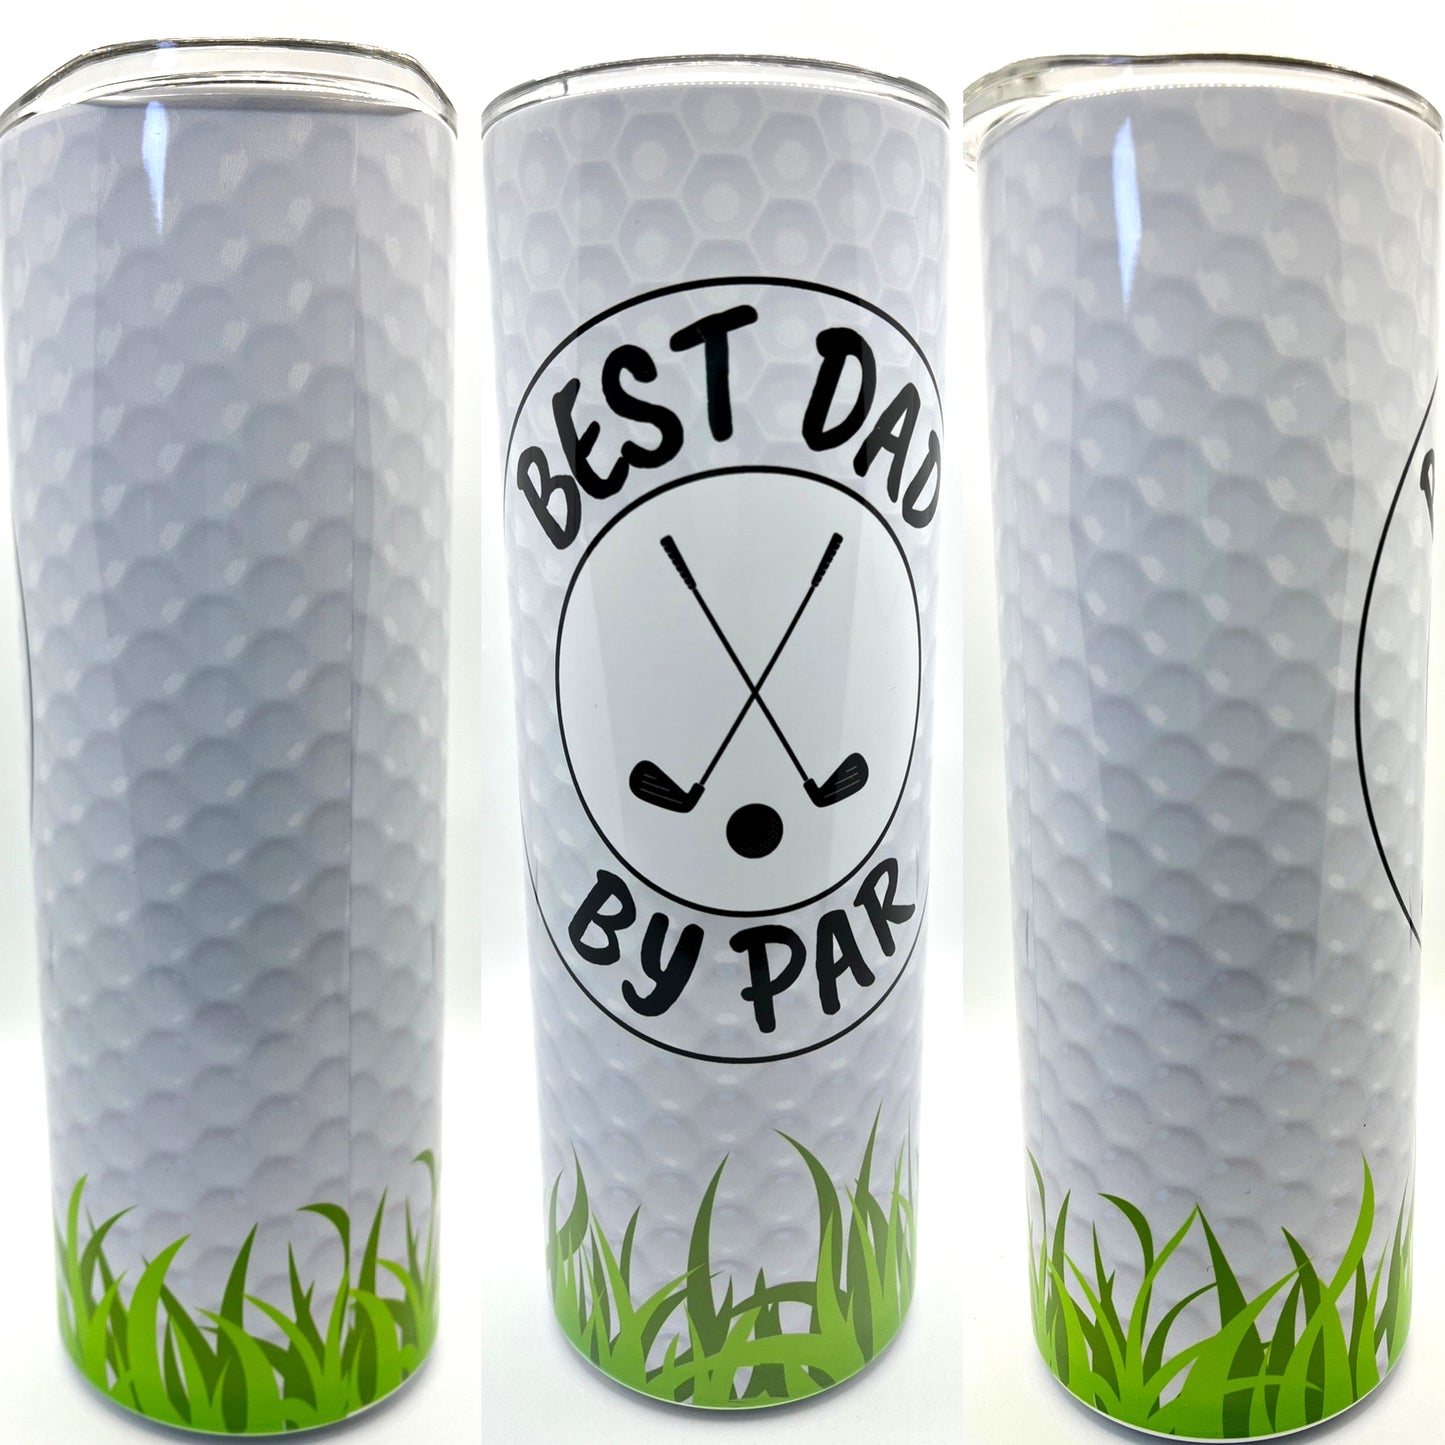 Best Dad by Par - 20oz Stainless Steel Tumbler with Lid and Straw